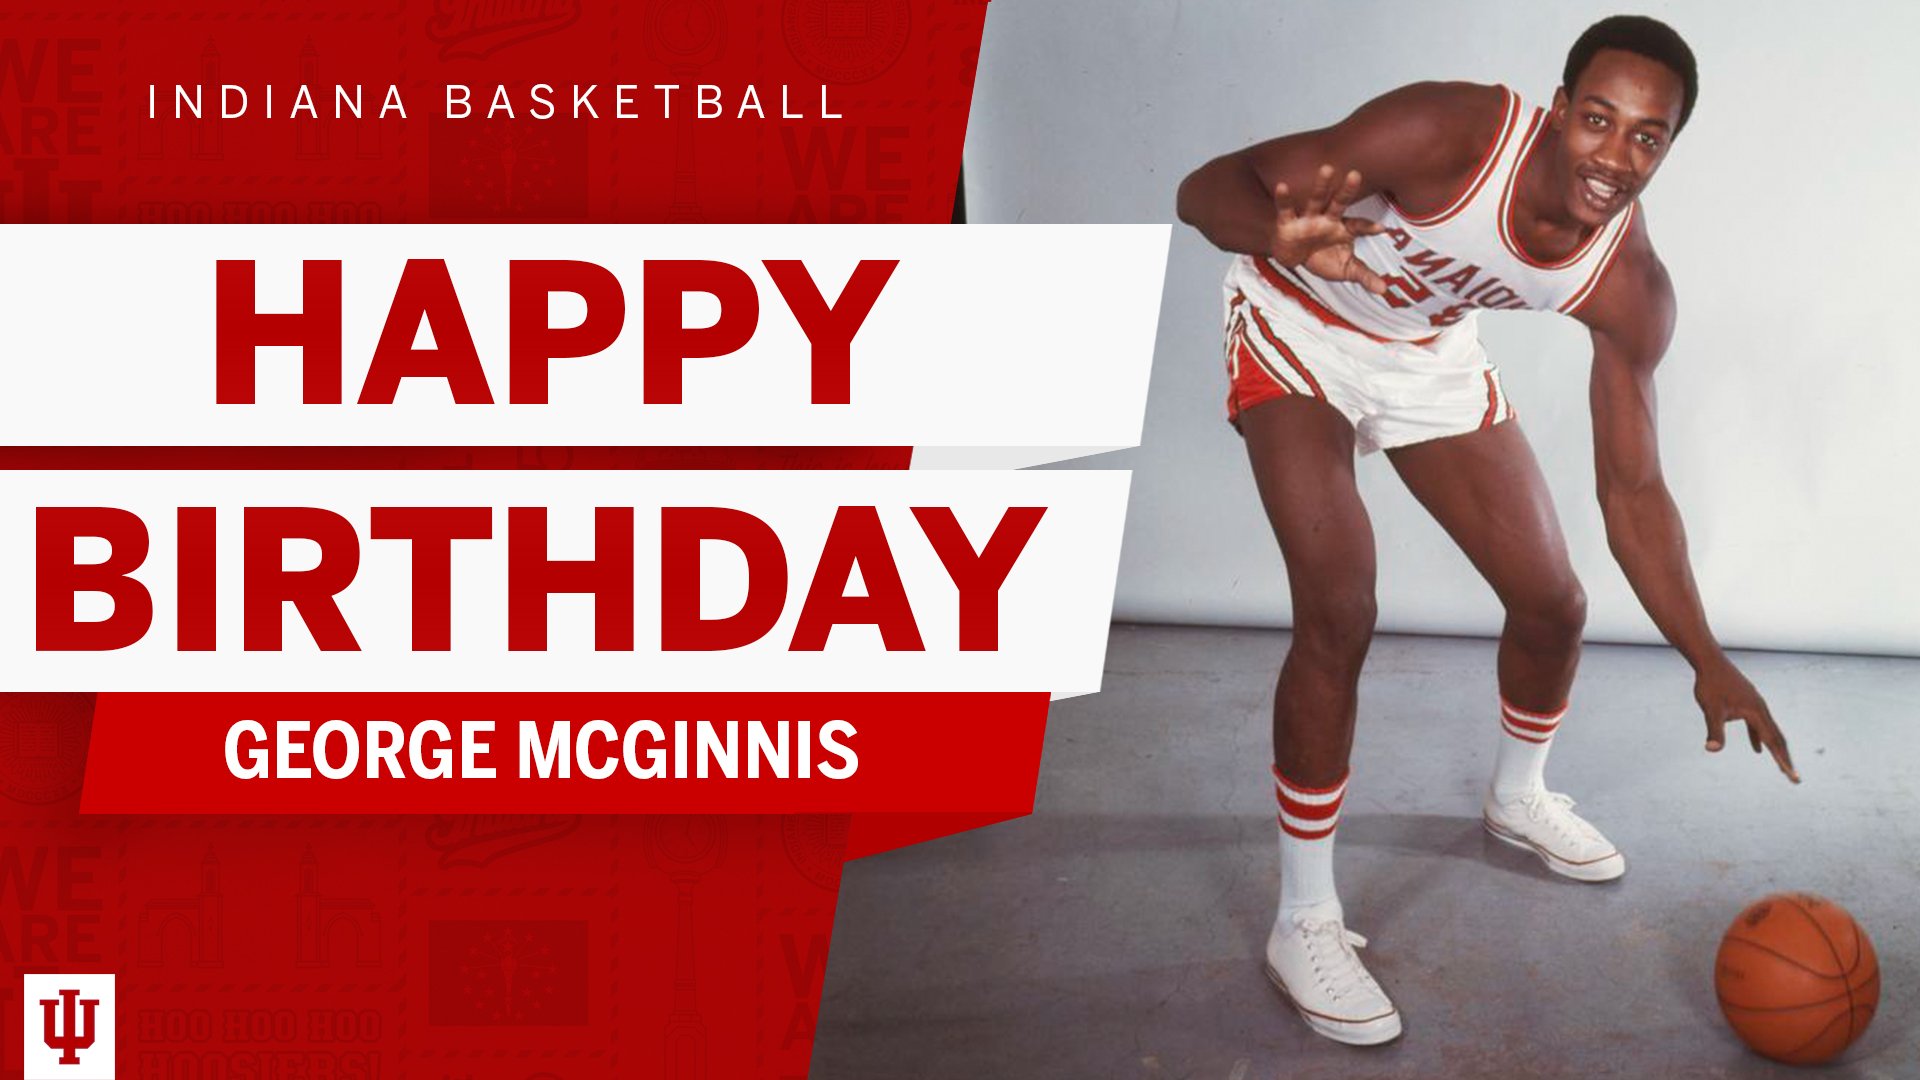 10 Things to Know About George McGinnis